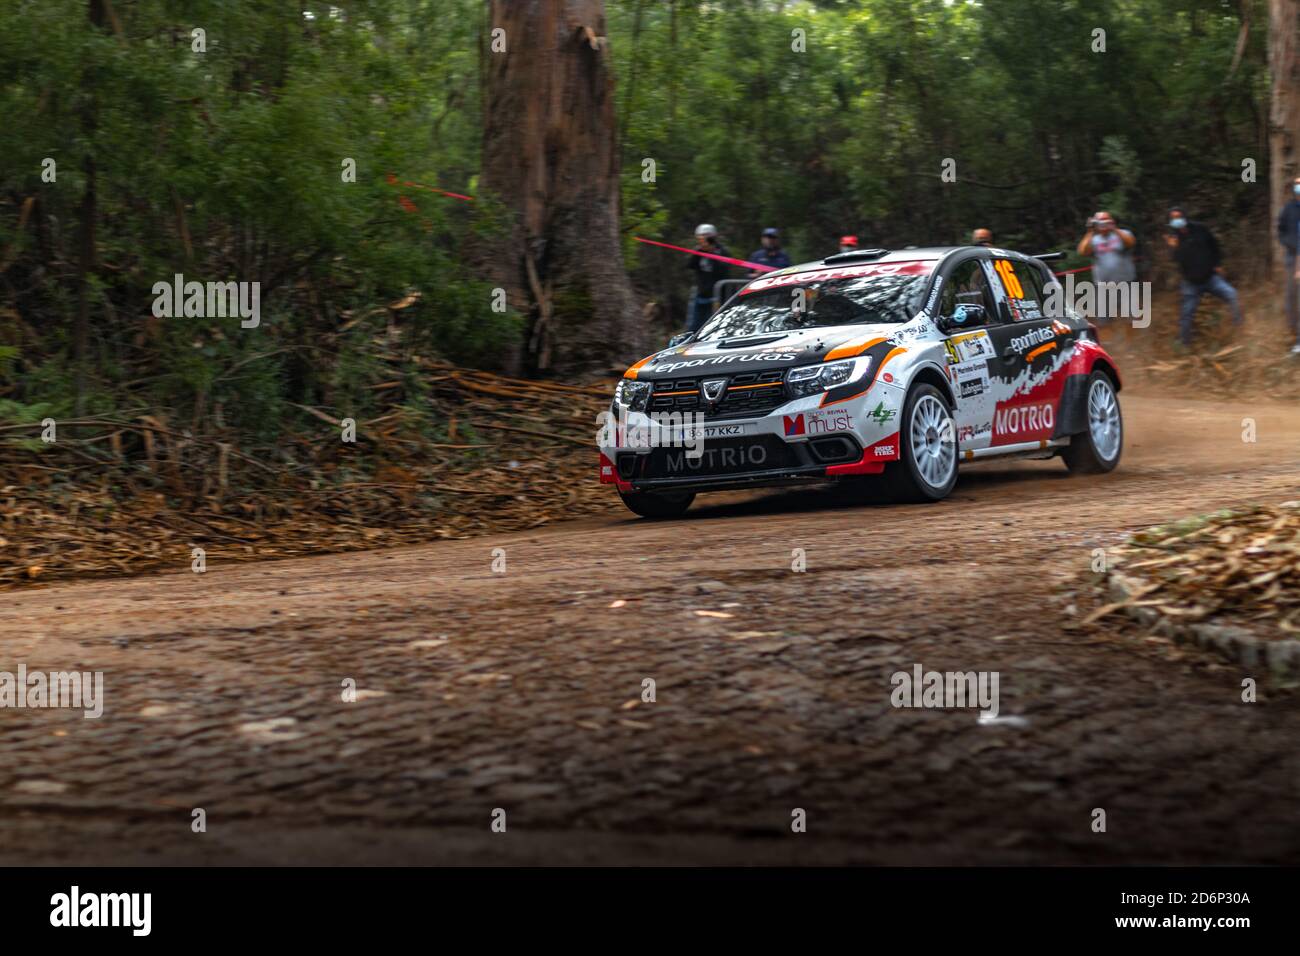 Page 3 - Rally Portugal High Resolution Stock Photography and Images - Alamy